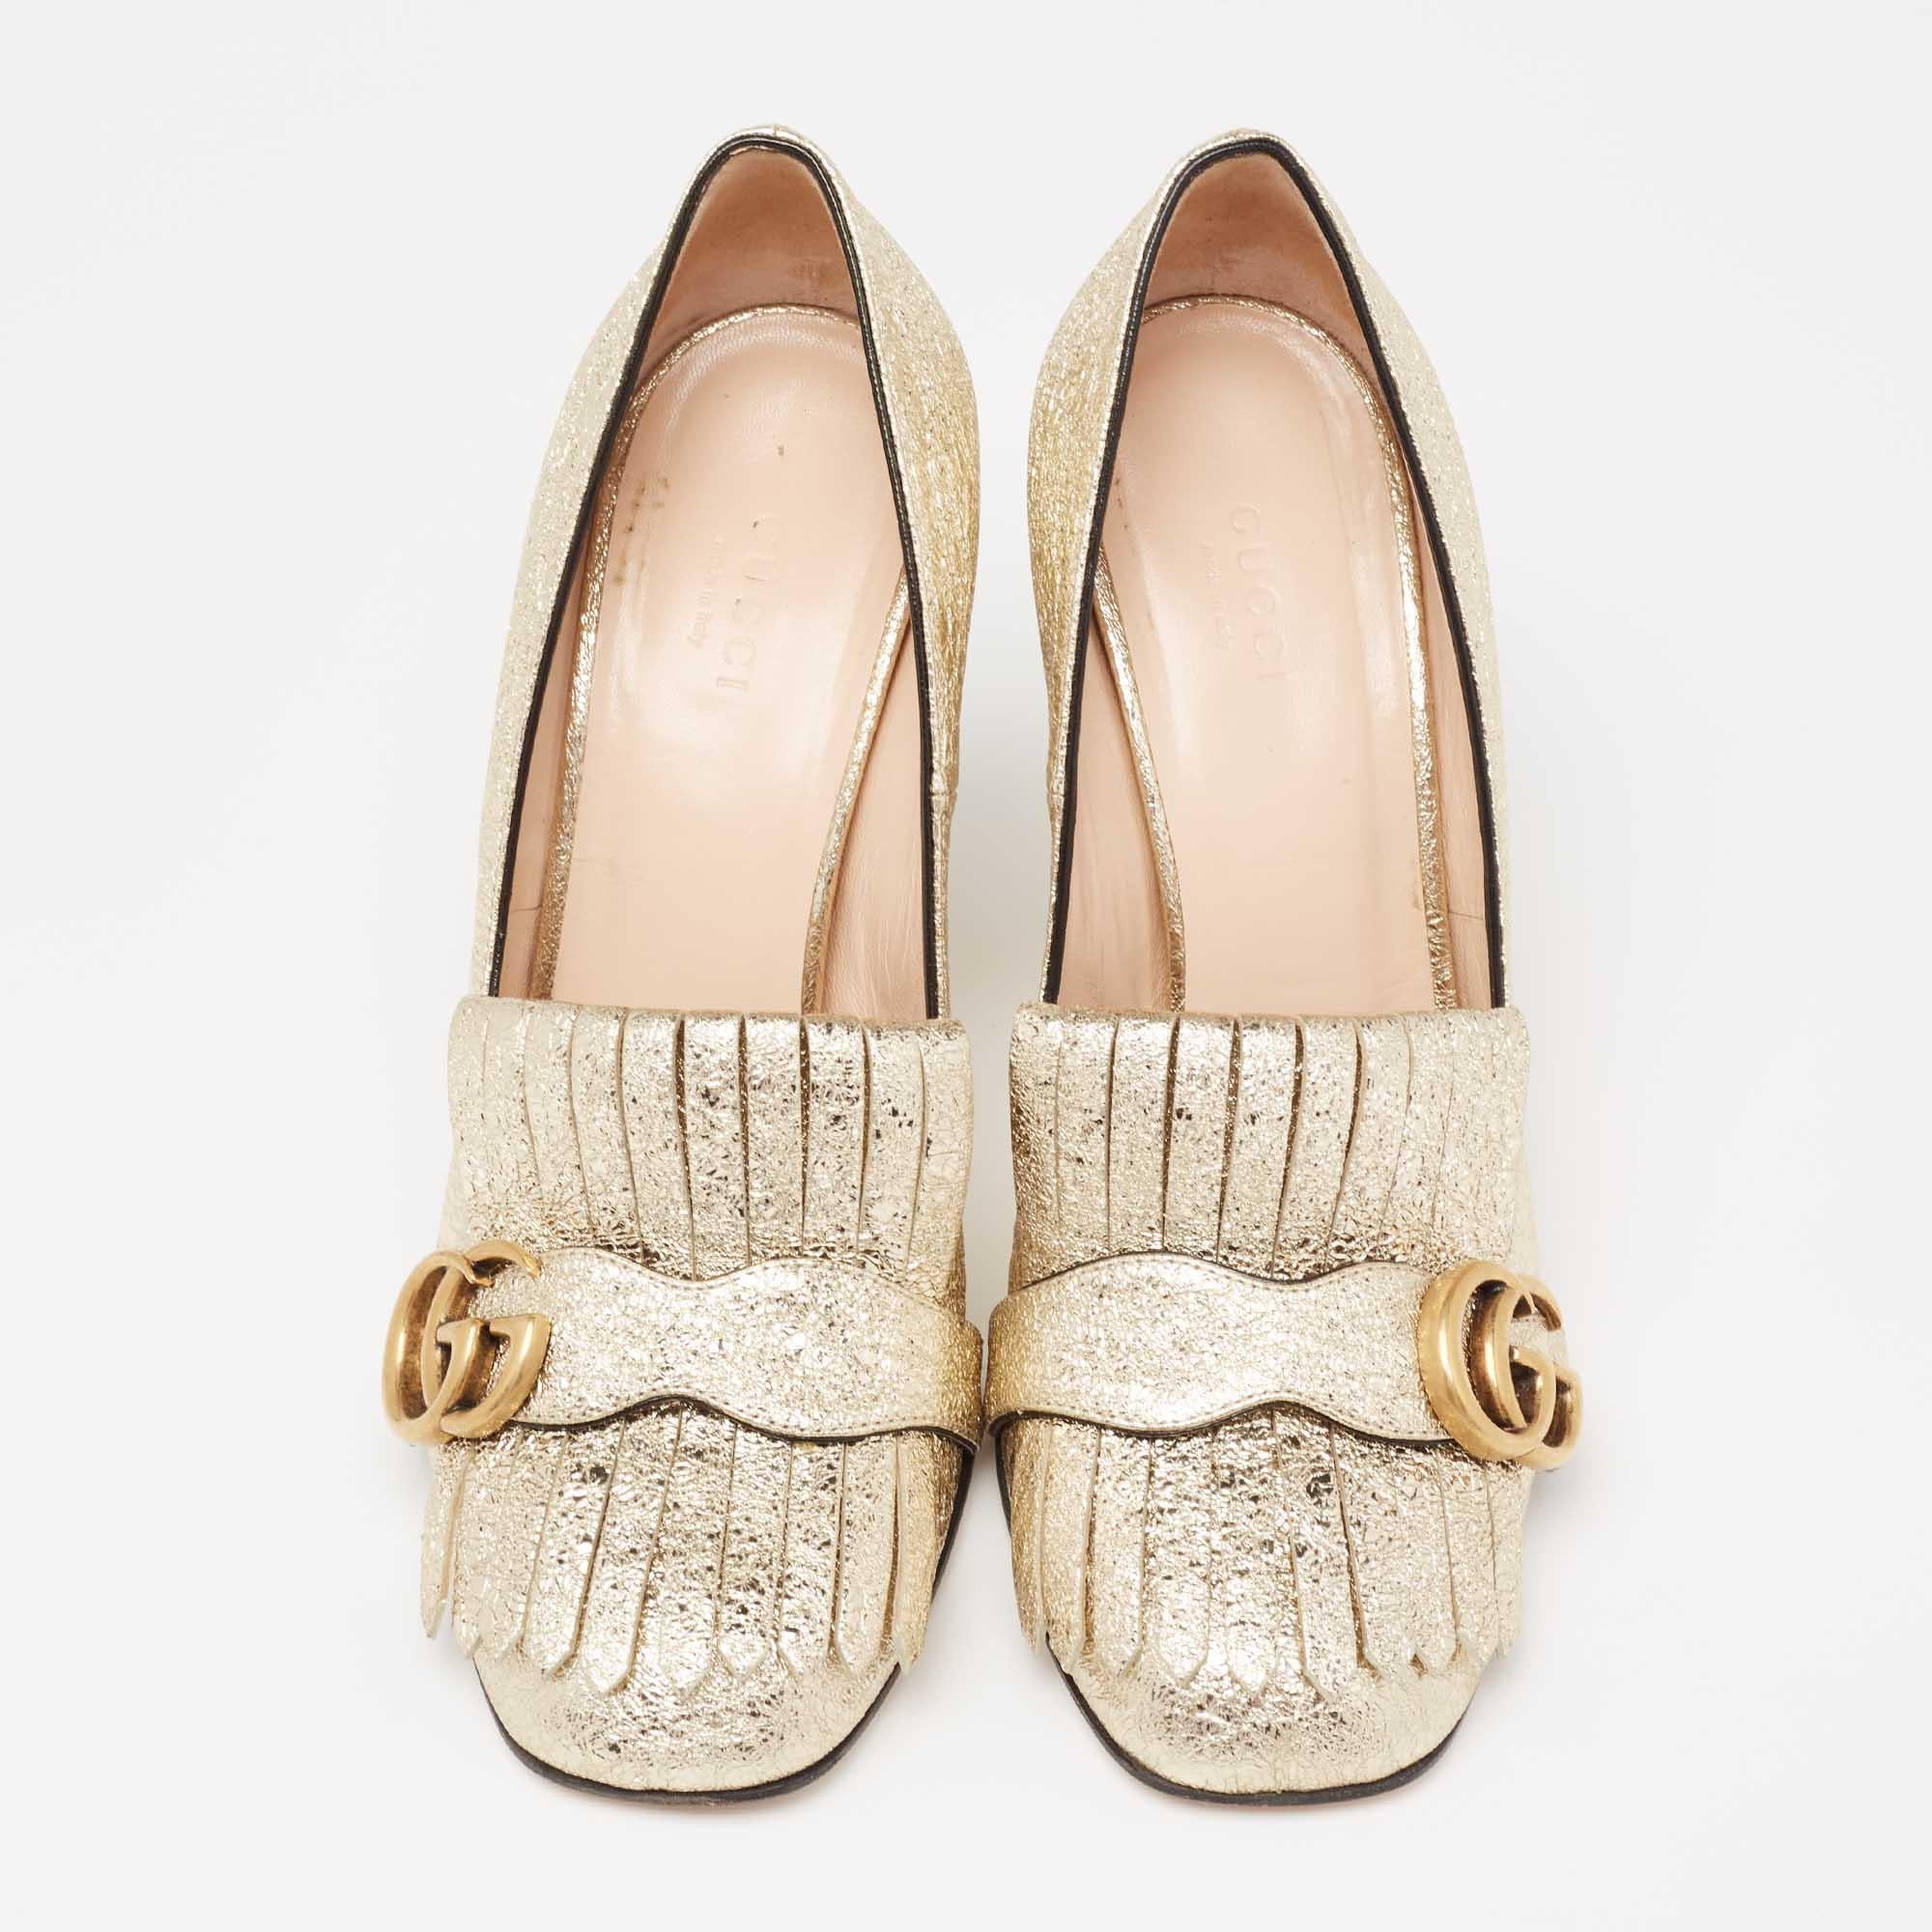 Absolutely on-trend and easy to flaunt, this pair of pumps by Gucci is a true stunner. They've been crafted from leather and styled with folded fringes and the brand's signature GG on the uppers. Comfortable insoles and a set of block heels complete